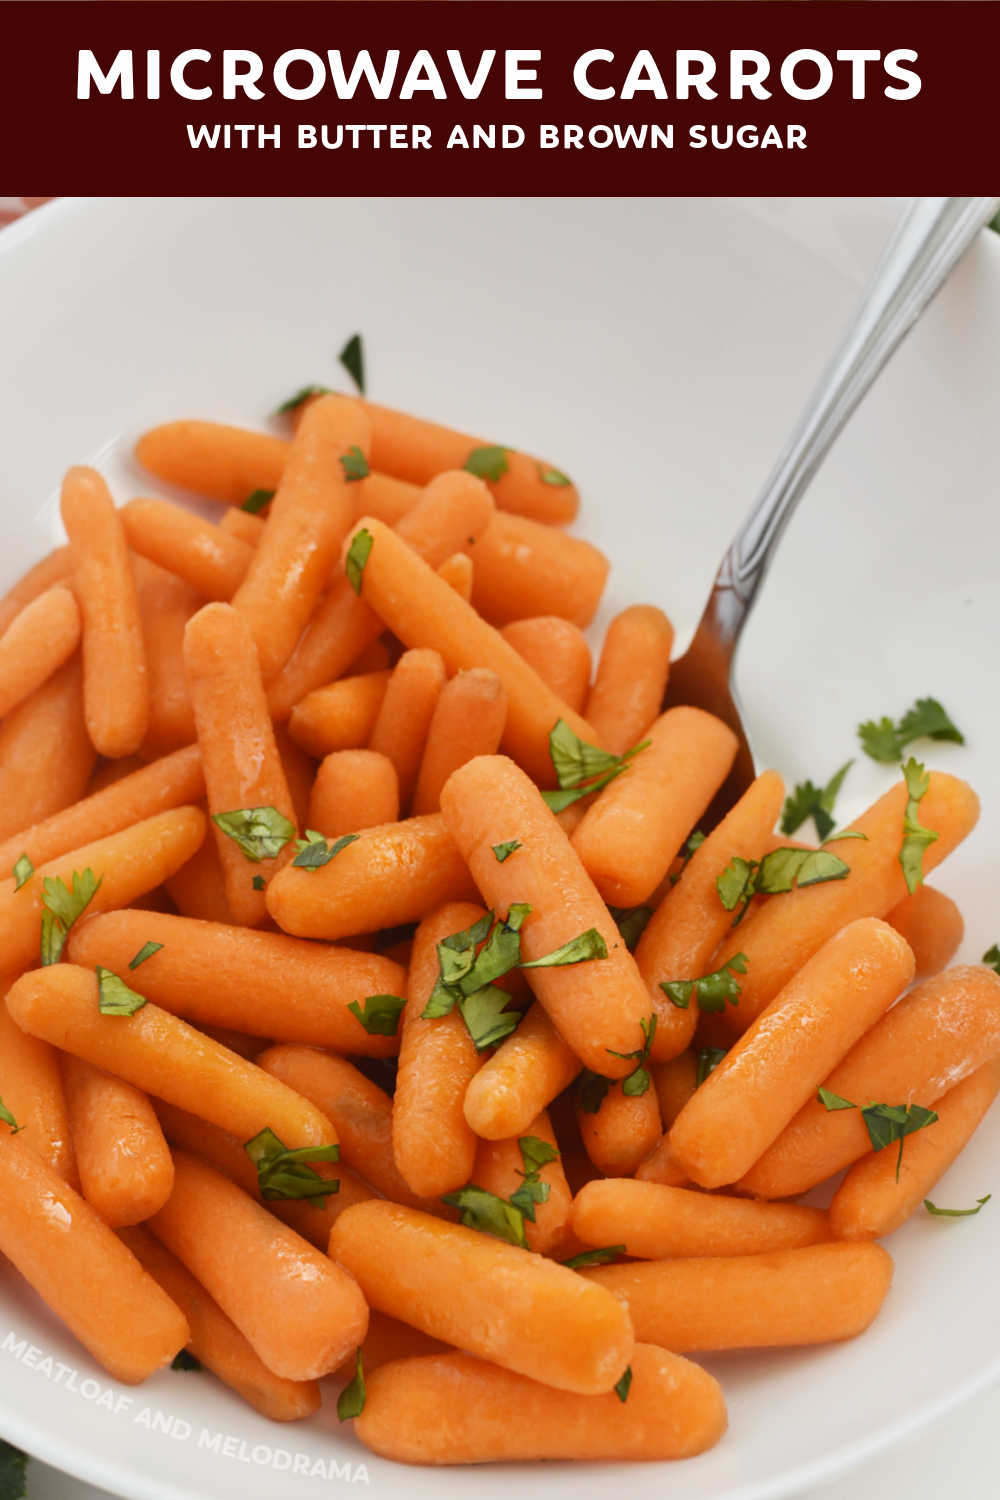 Microwave Carrots with butter and brown sugar for a quick and easy side dish. It takes just 5 minutes to steam carrots in the microwave with this simple recipe, and it's perfect for everyday dinners and holidays! via @meamel